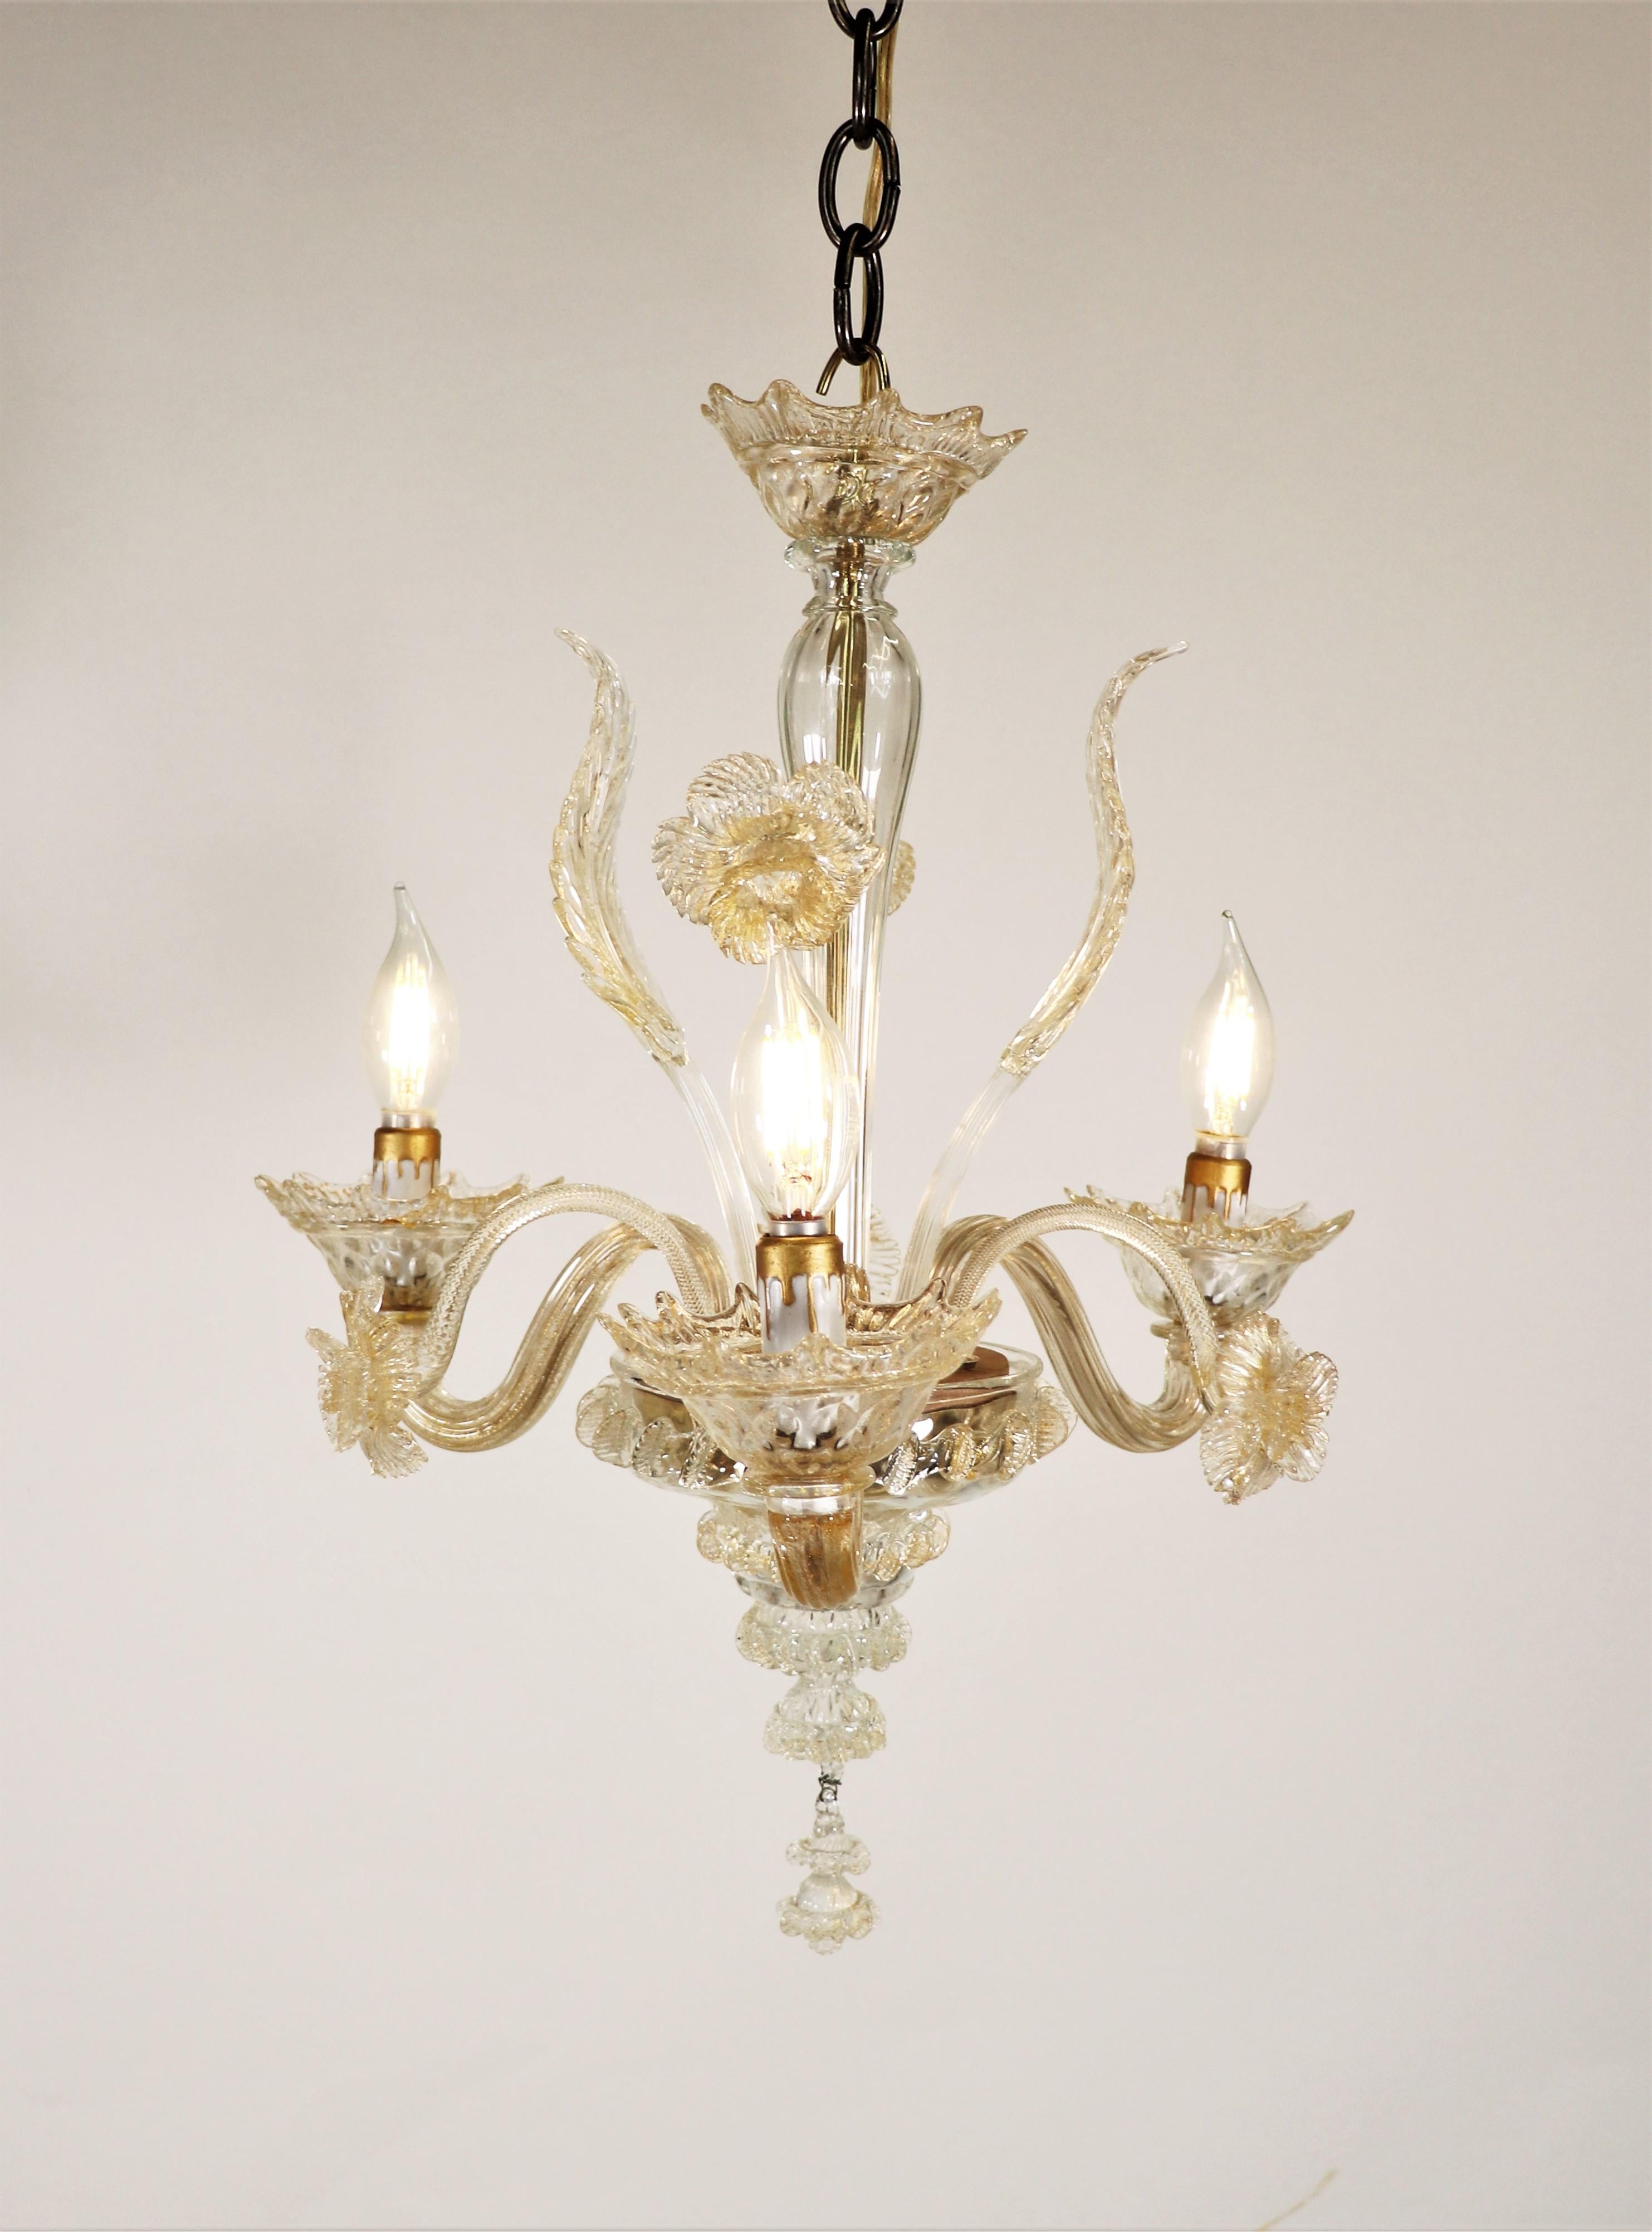 Despite its small size, this classic floral Murano three-arm chandelier creates quite a statement. Stylized with sprouting daffodils and leaves, the undulating arms hold bobeches with petal-shaped rims. The hints of gold dust dispersed throughout